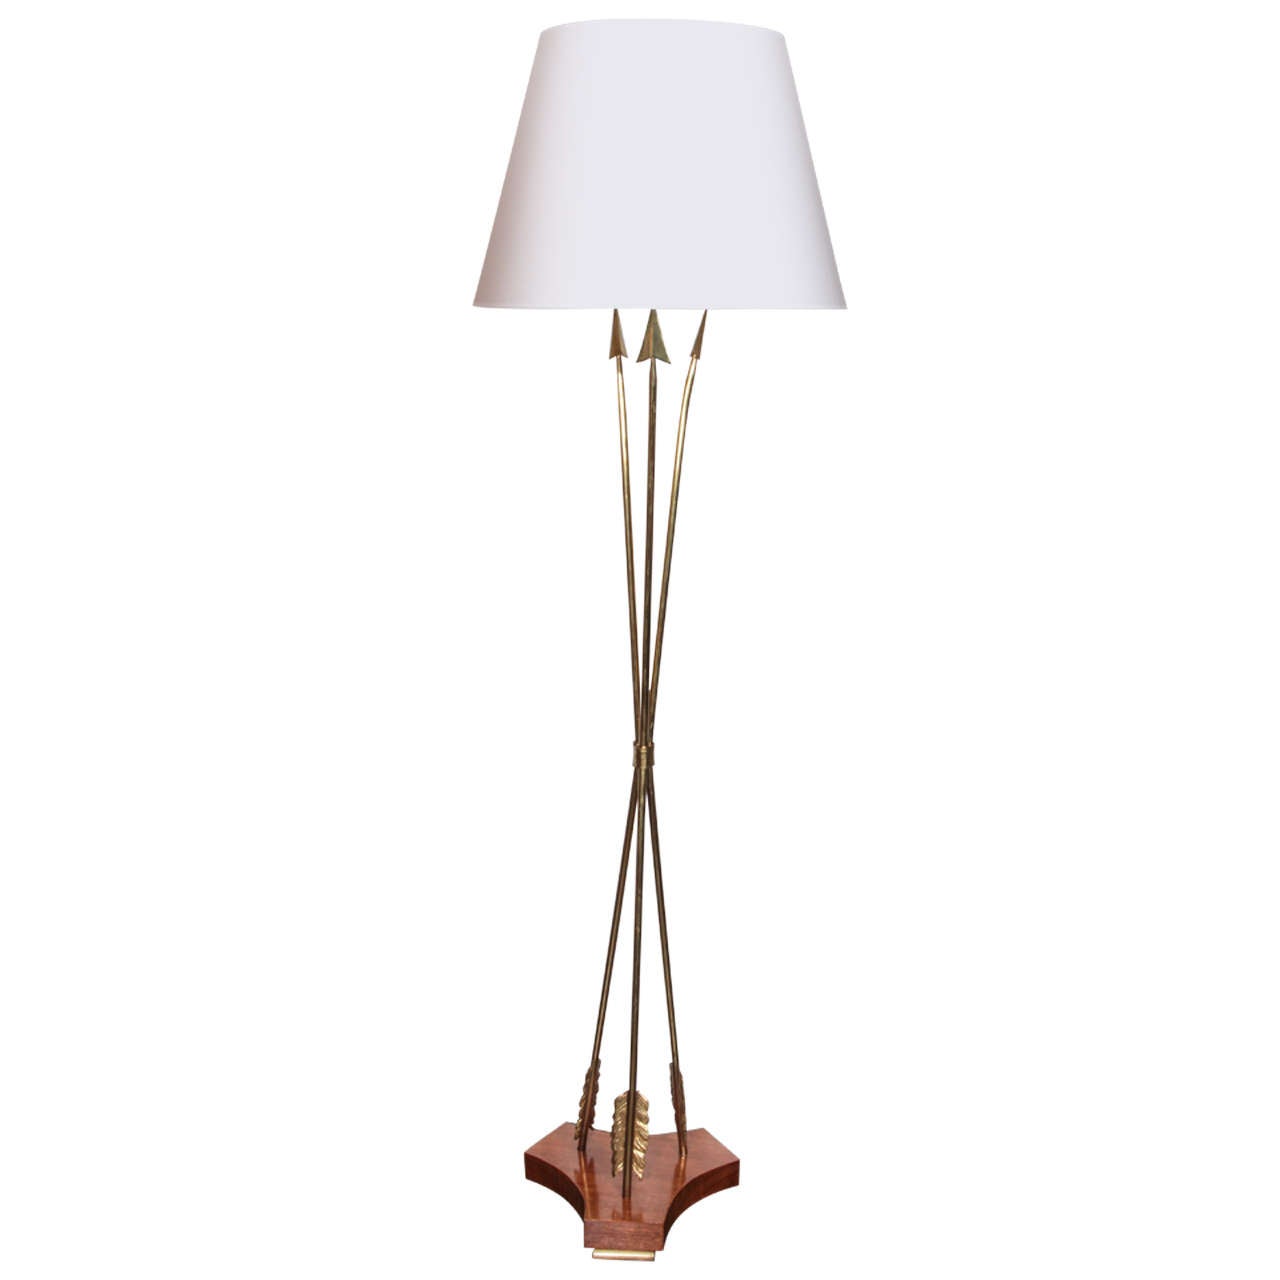 French floor lamp, late 1940s, offered by R. Louis Bofferding Decorative and Fine Art